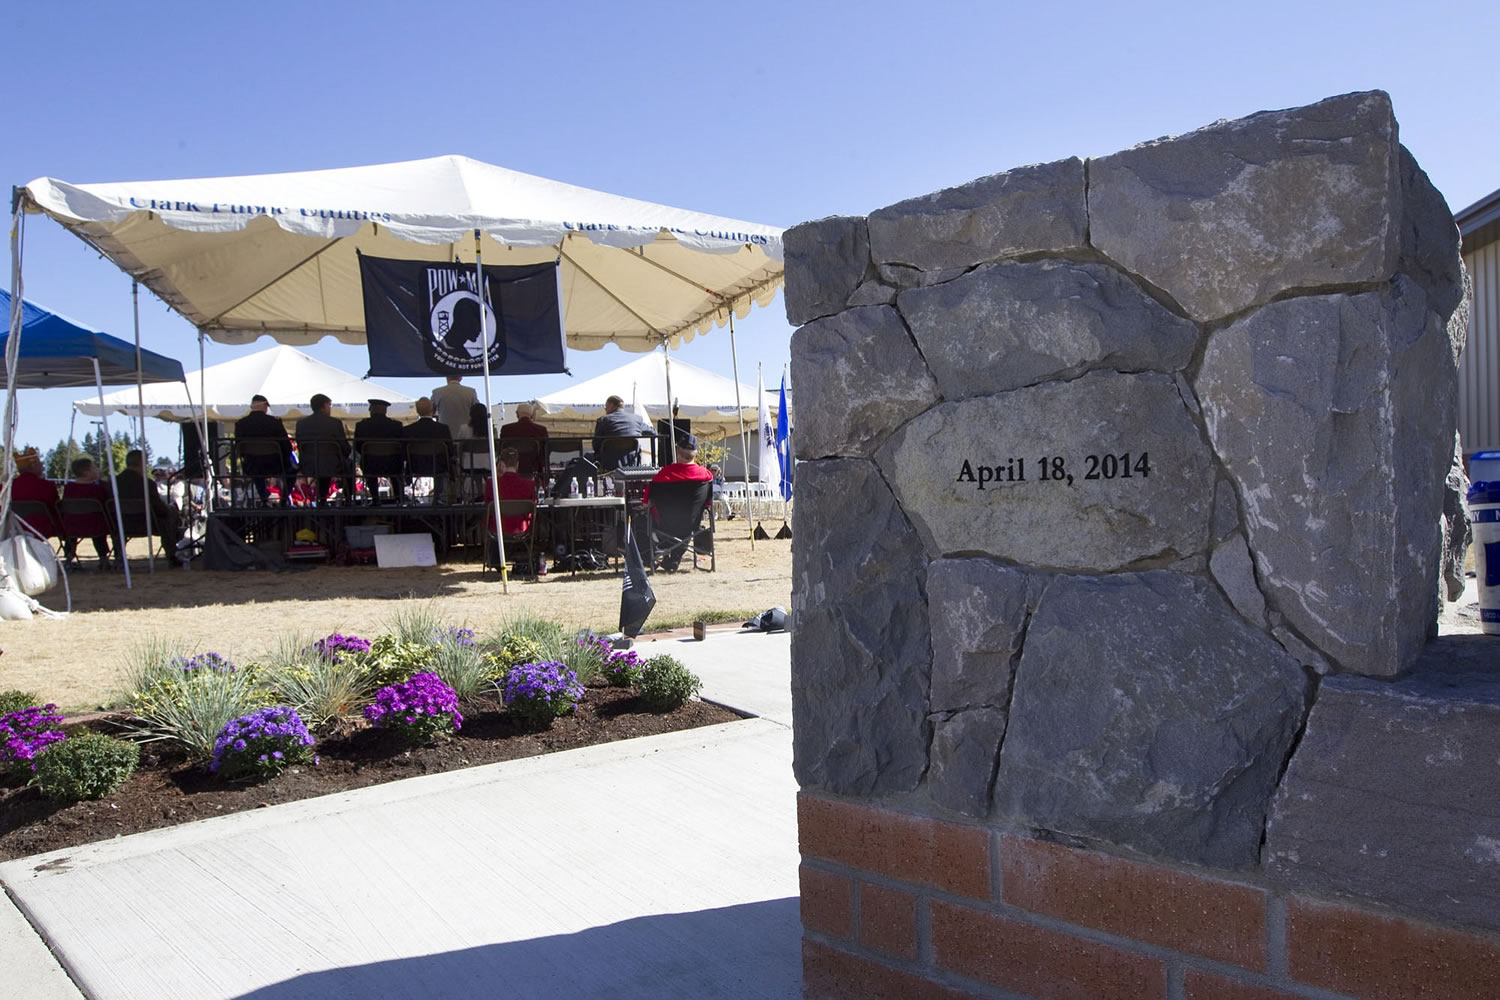 The POW/MIA memorial at the Armed Forces Reserve Center in Vancouver is built of local rock, each stone representing a person.